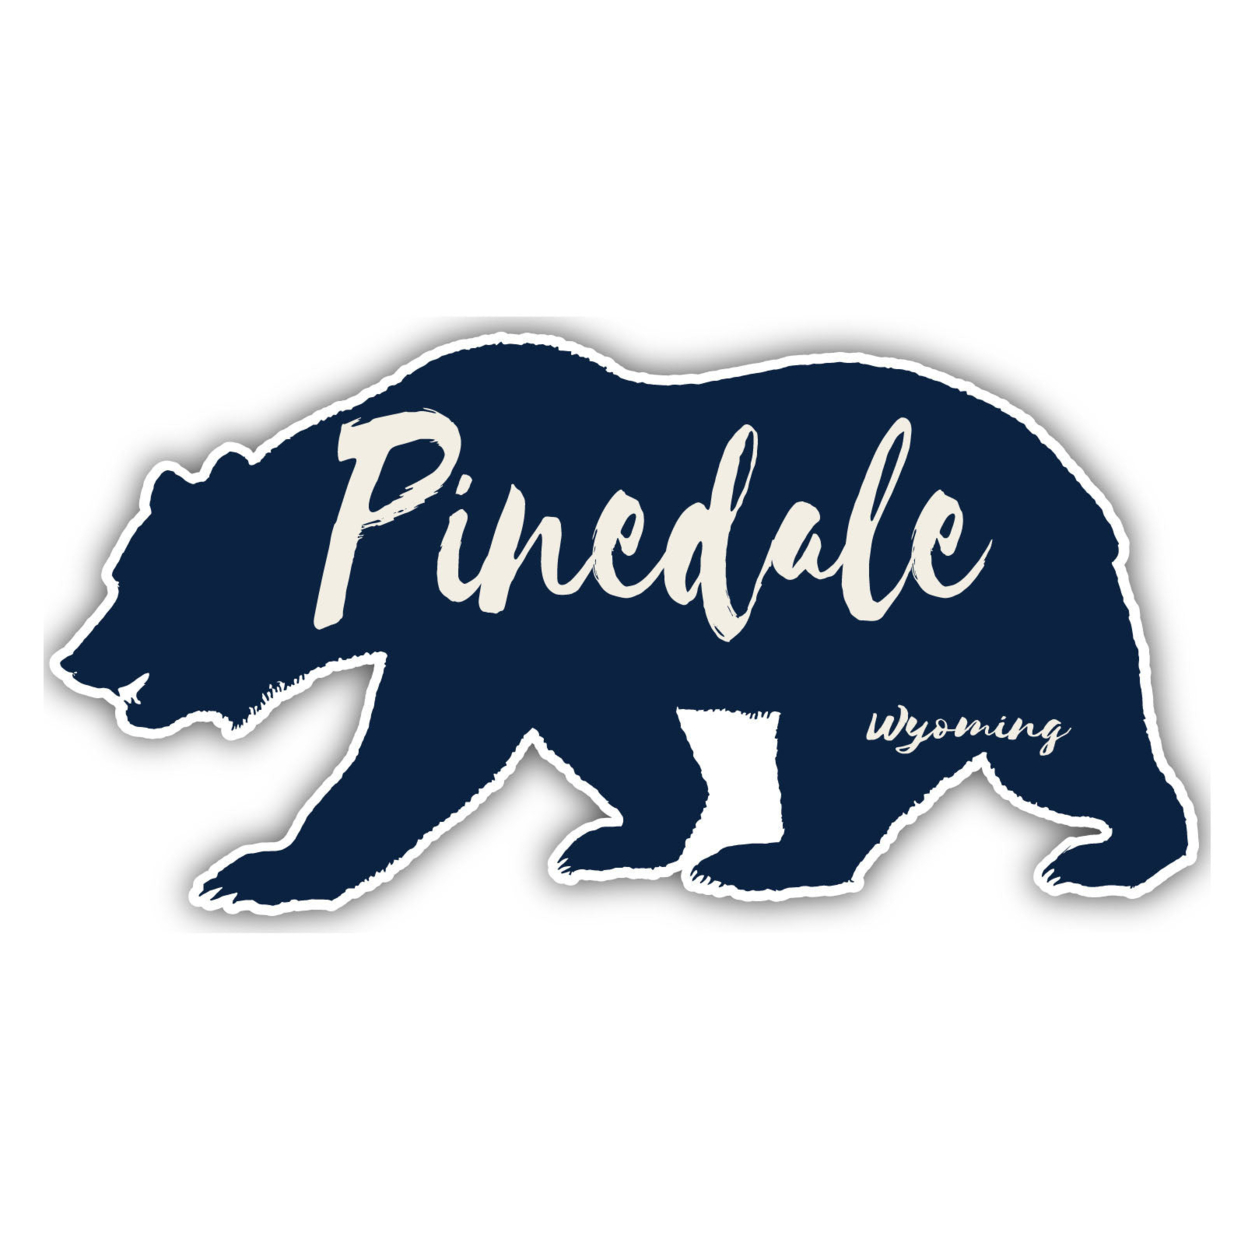 Pinedale Wyoming Souvenir Decorative Stickers (Choose Theme And Size) - Single Unit, 4-Inch, Adventures Awaits